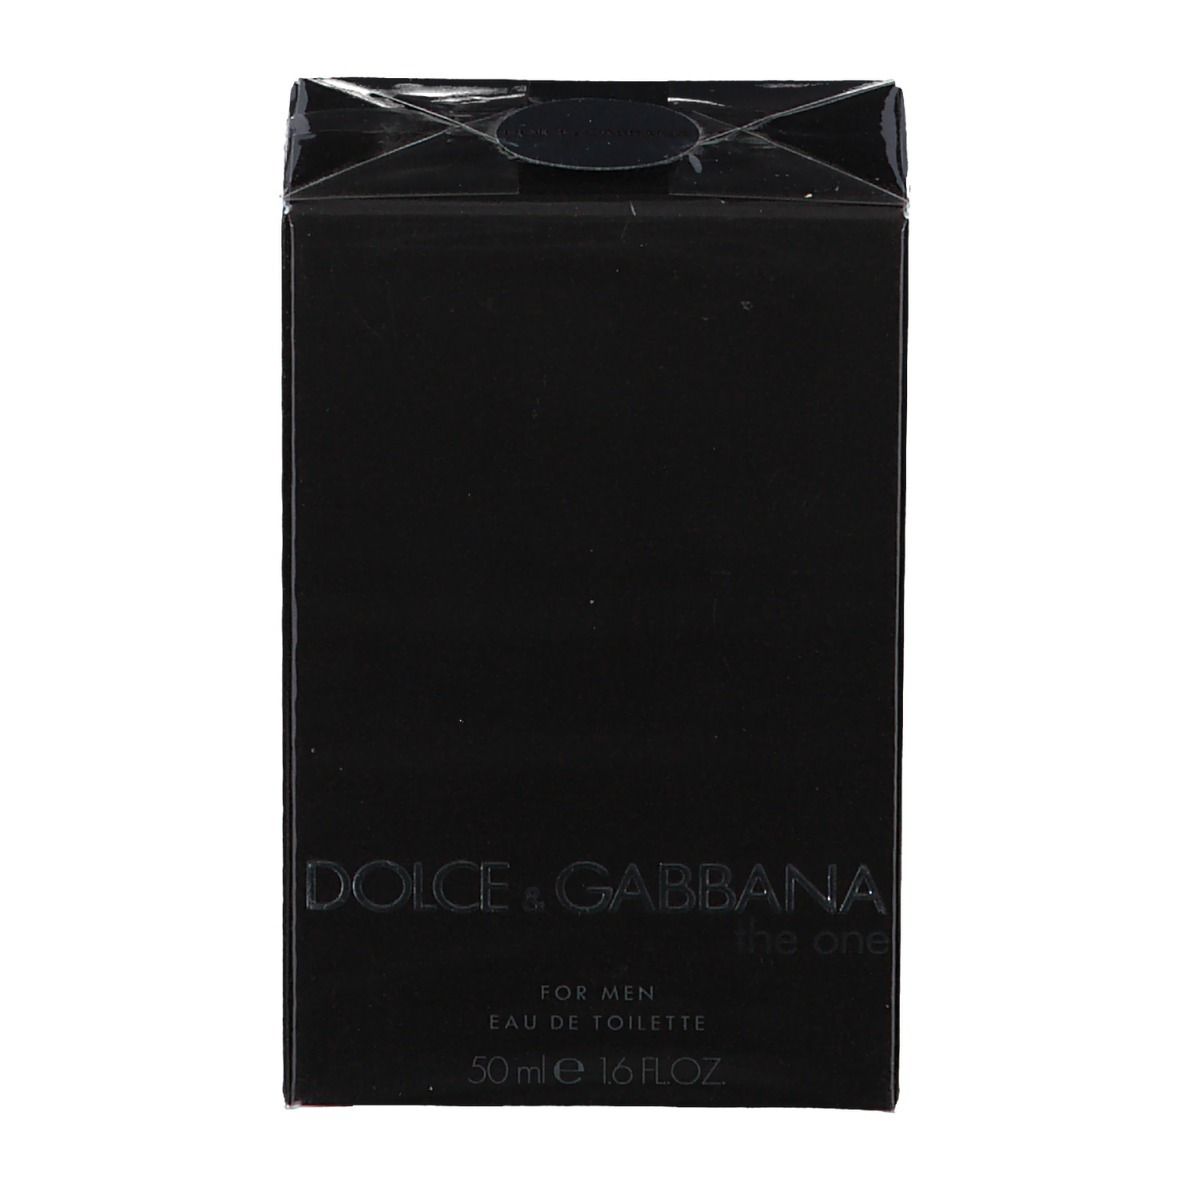 DOLCE & GABBANA The One homme